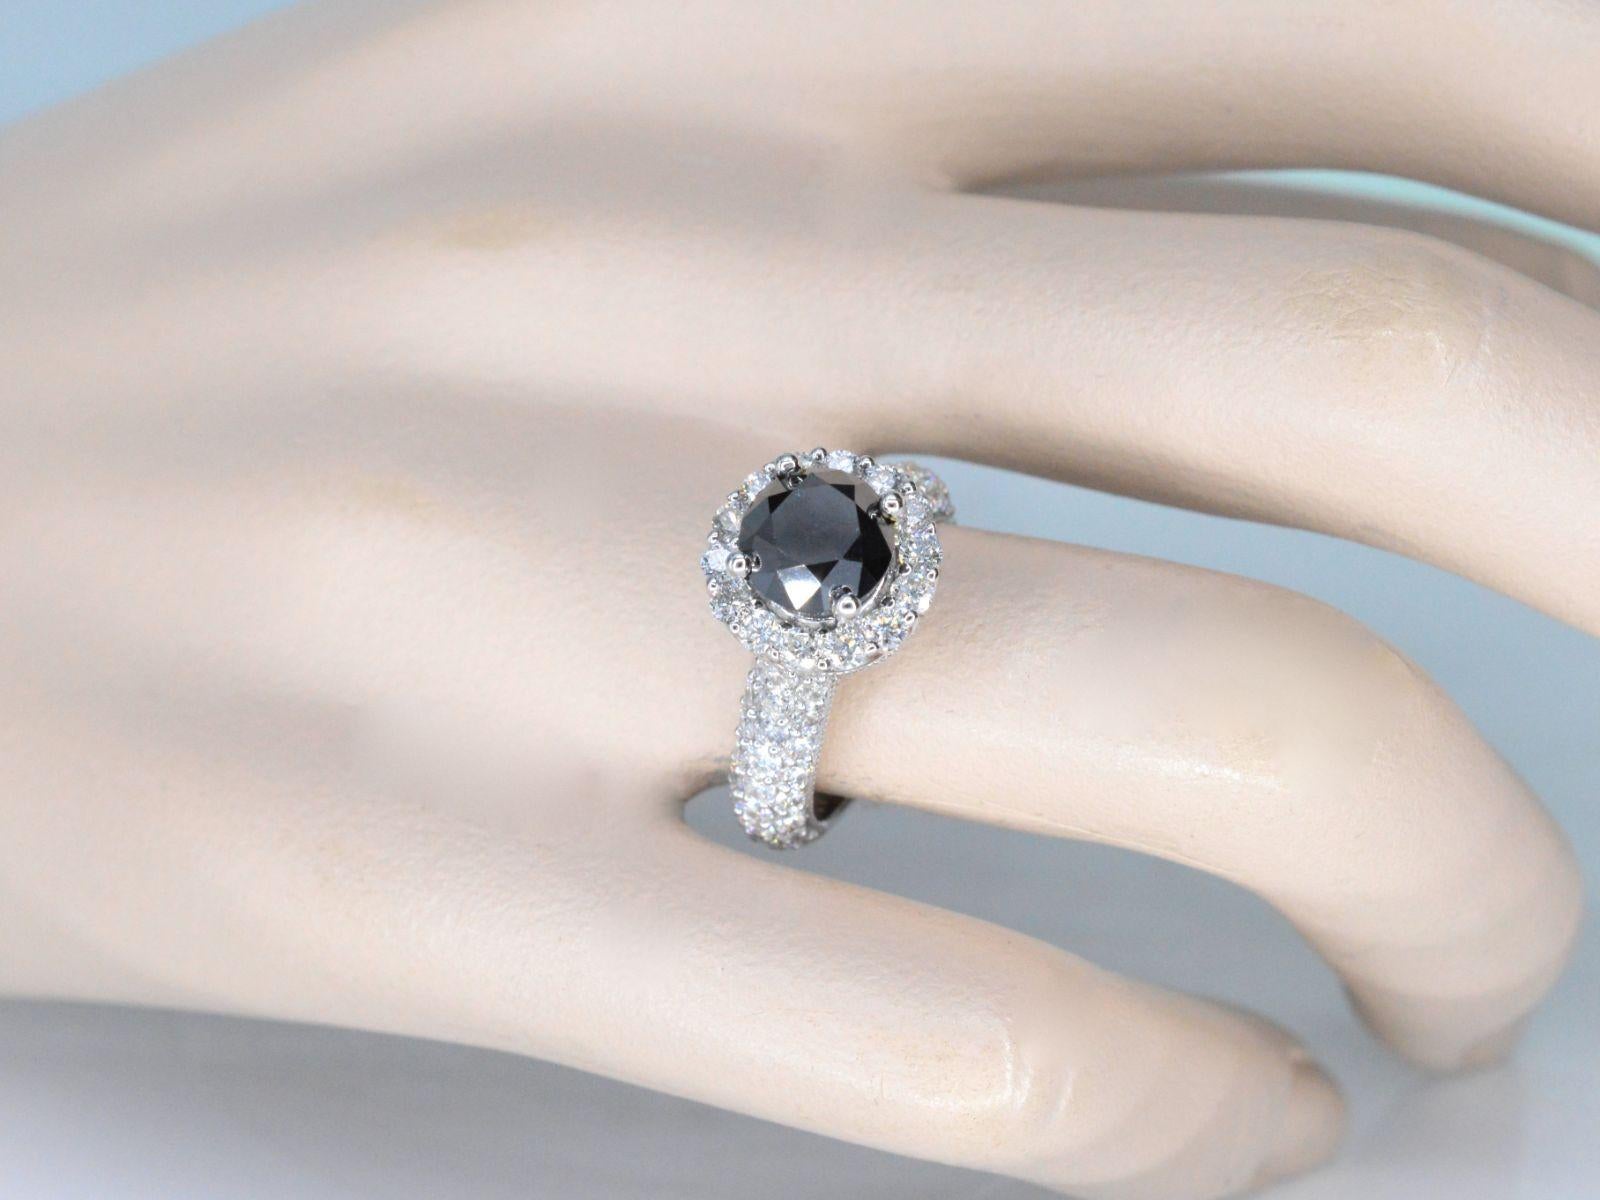 This exquisite ring combines the striking allure of a single black diamond with the classic elegance of white diamonds. The black diamond, cut in a brilliant style, weighs 2.50 carats, exhibiting an opaque purity and very good grinding quality. The